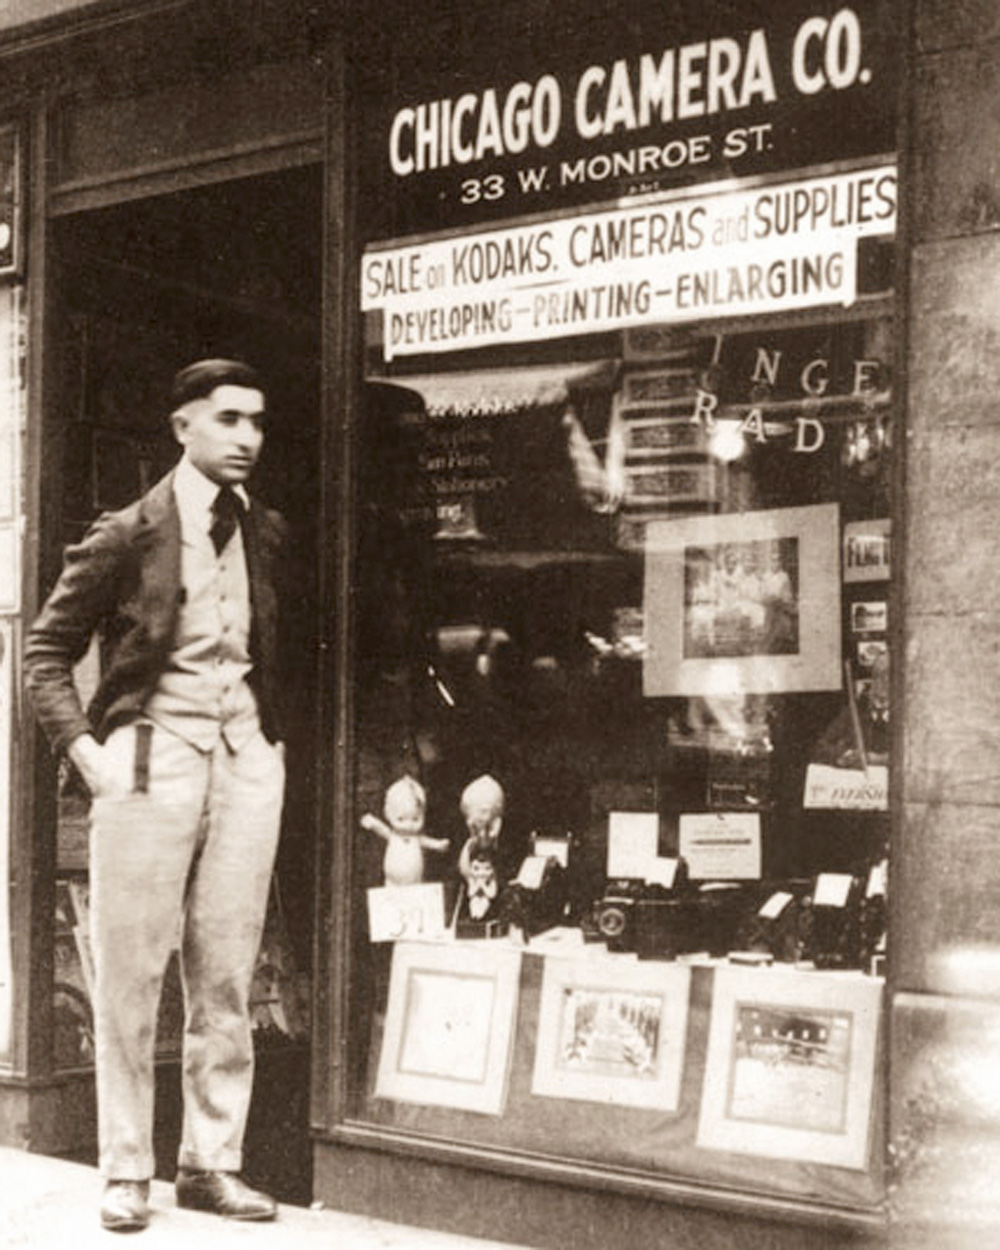 My grandfather Edwin Shutan in front of the store he owned: Chicago Camera, circa 1918. He sold many items besides cameras. You can see Kewpie dolls in the window. He also sold pen and pencil sets. A few years later, he changed the name to Shutan Camera. View full size.